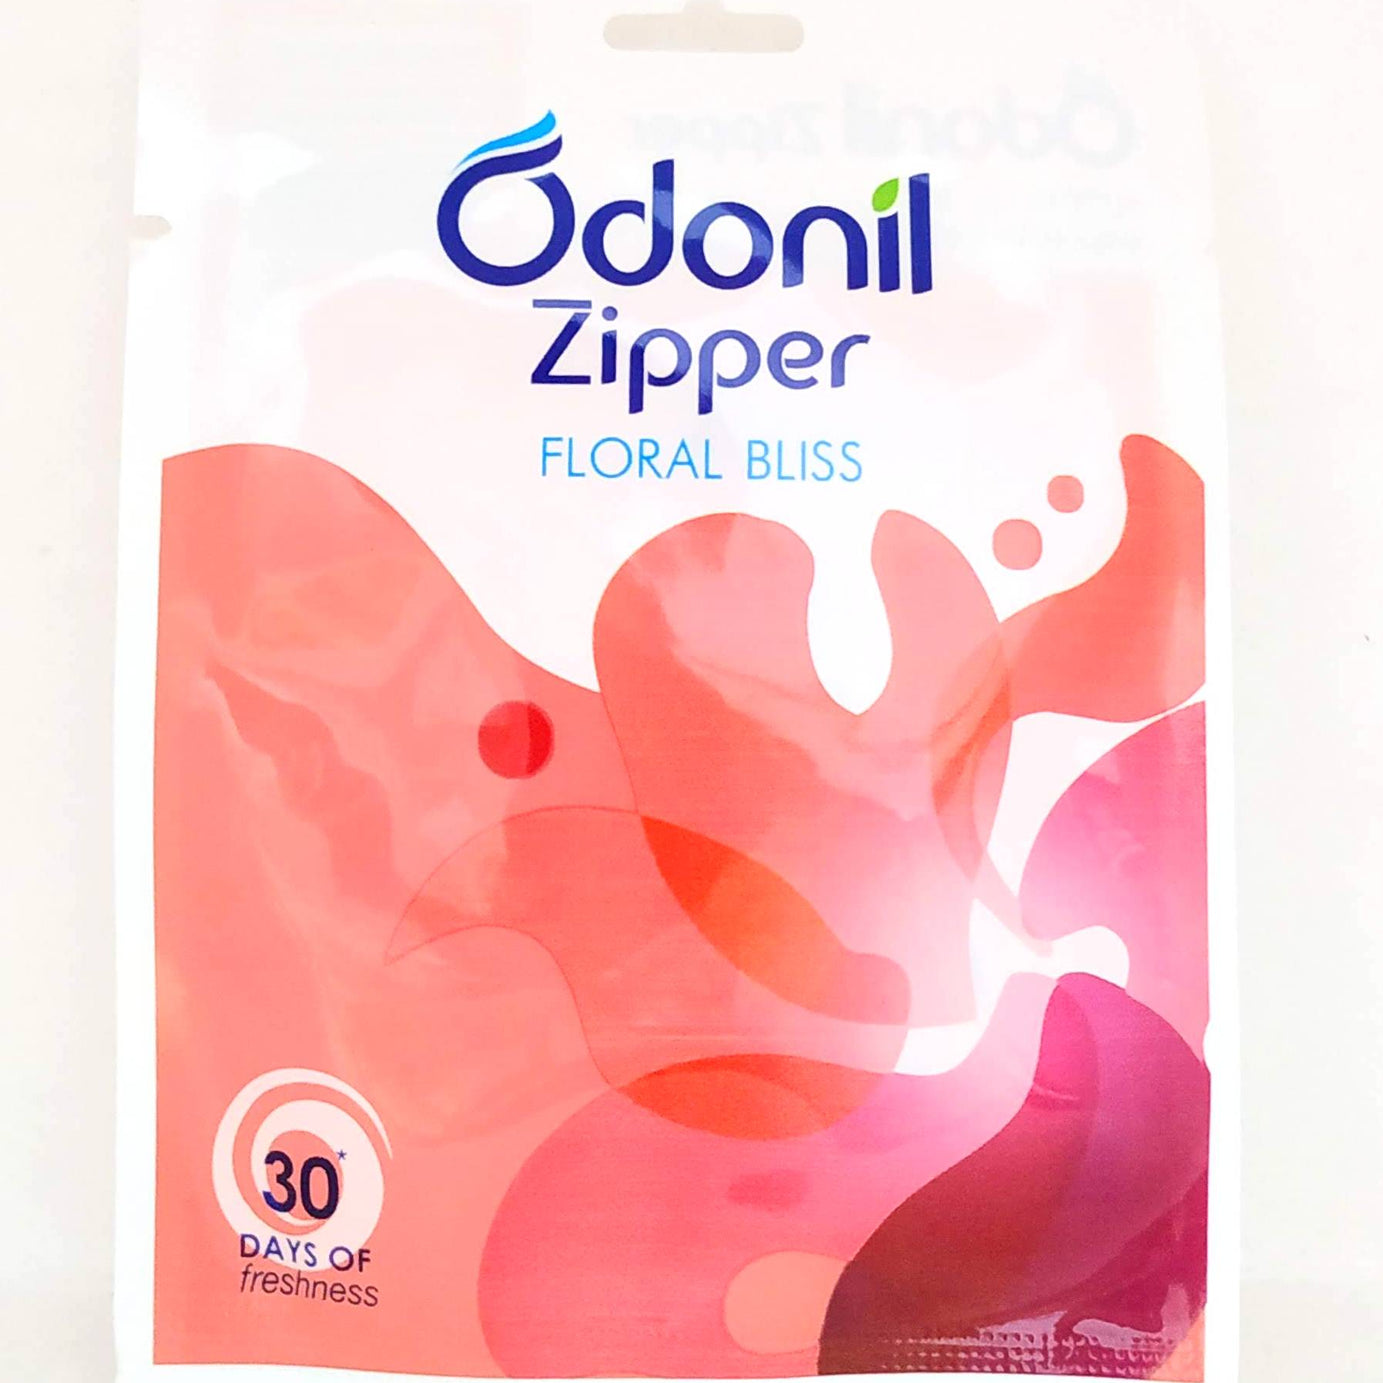 Shop Odonil Zipper - Floral Bliss at price 55.00 from Dabur Online - Ayush Care